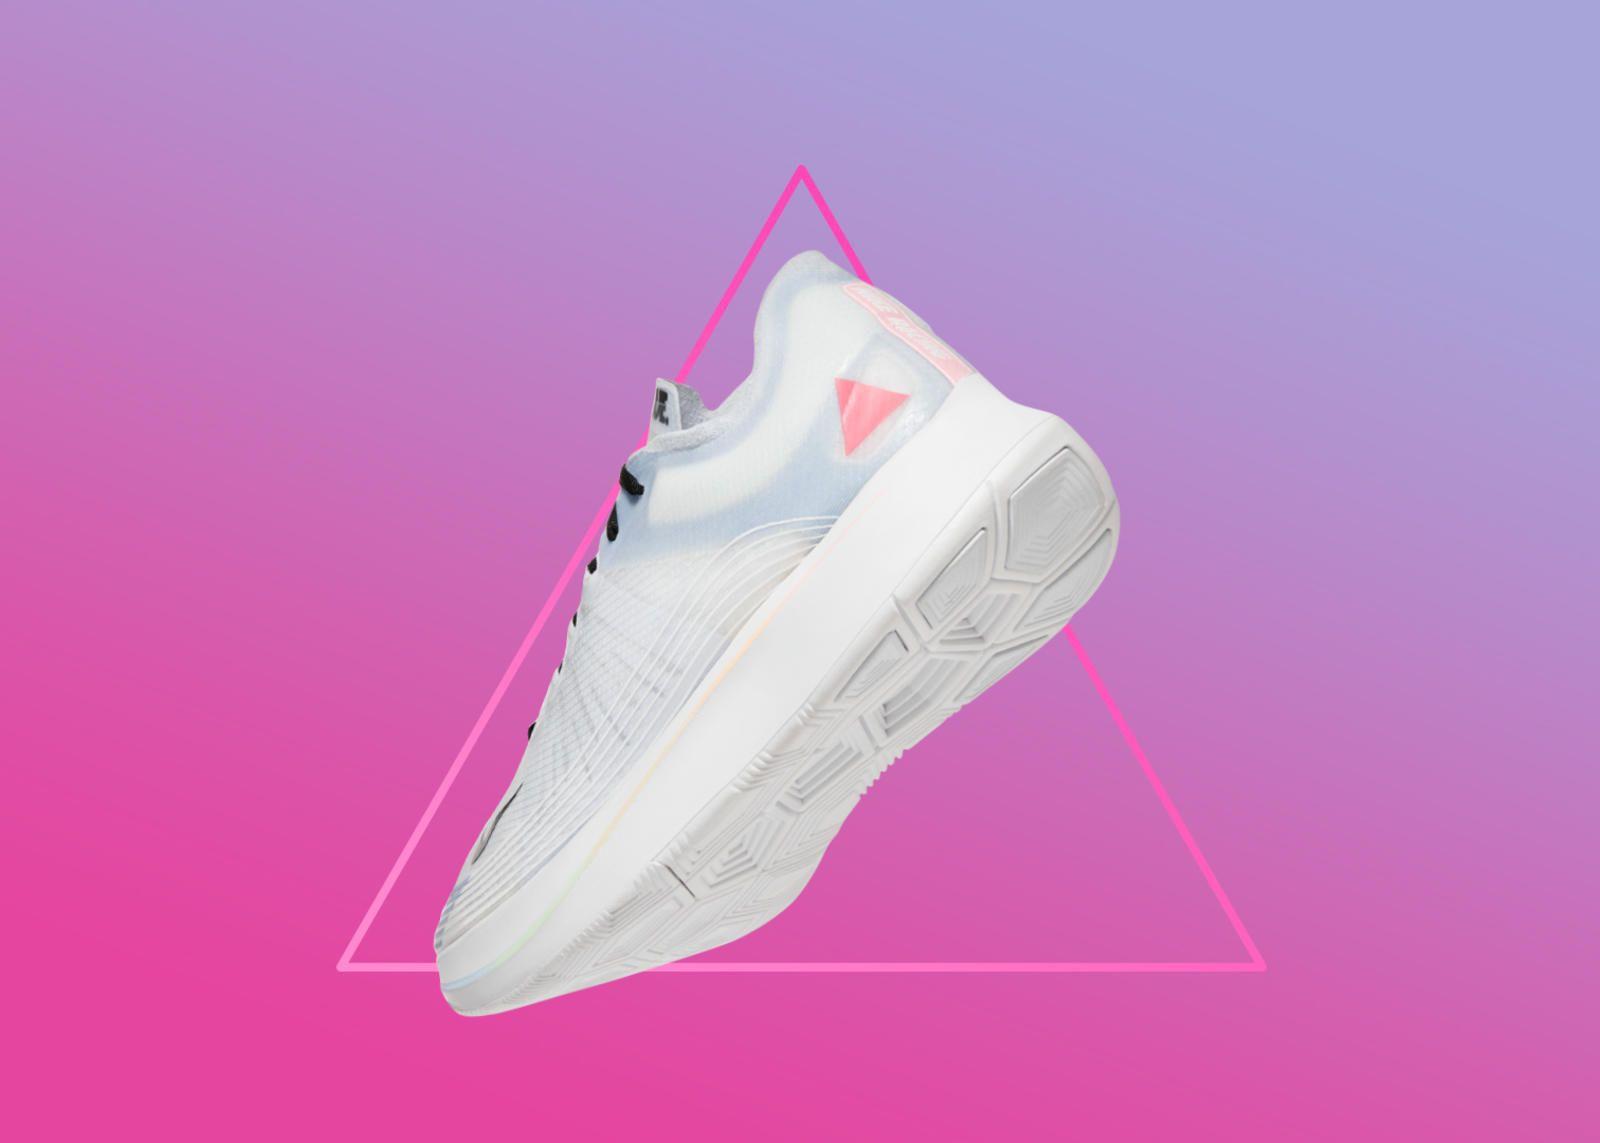 Nike Shoes with the Triangle Logo - Nike BETRUE 2018 Collection - Nike News